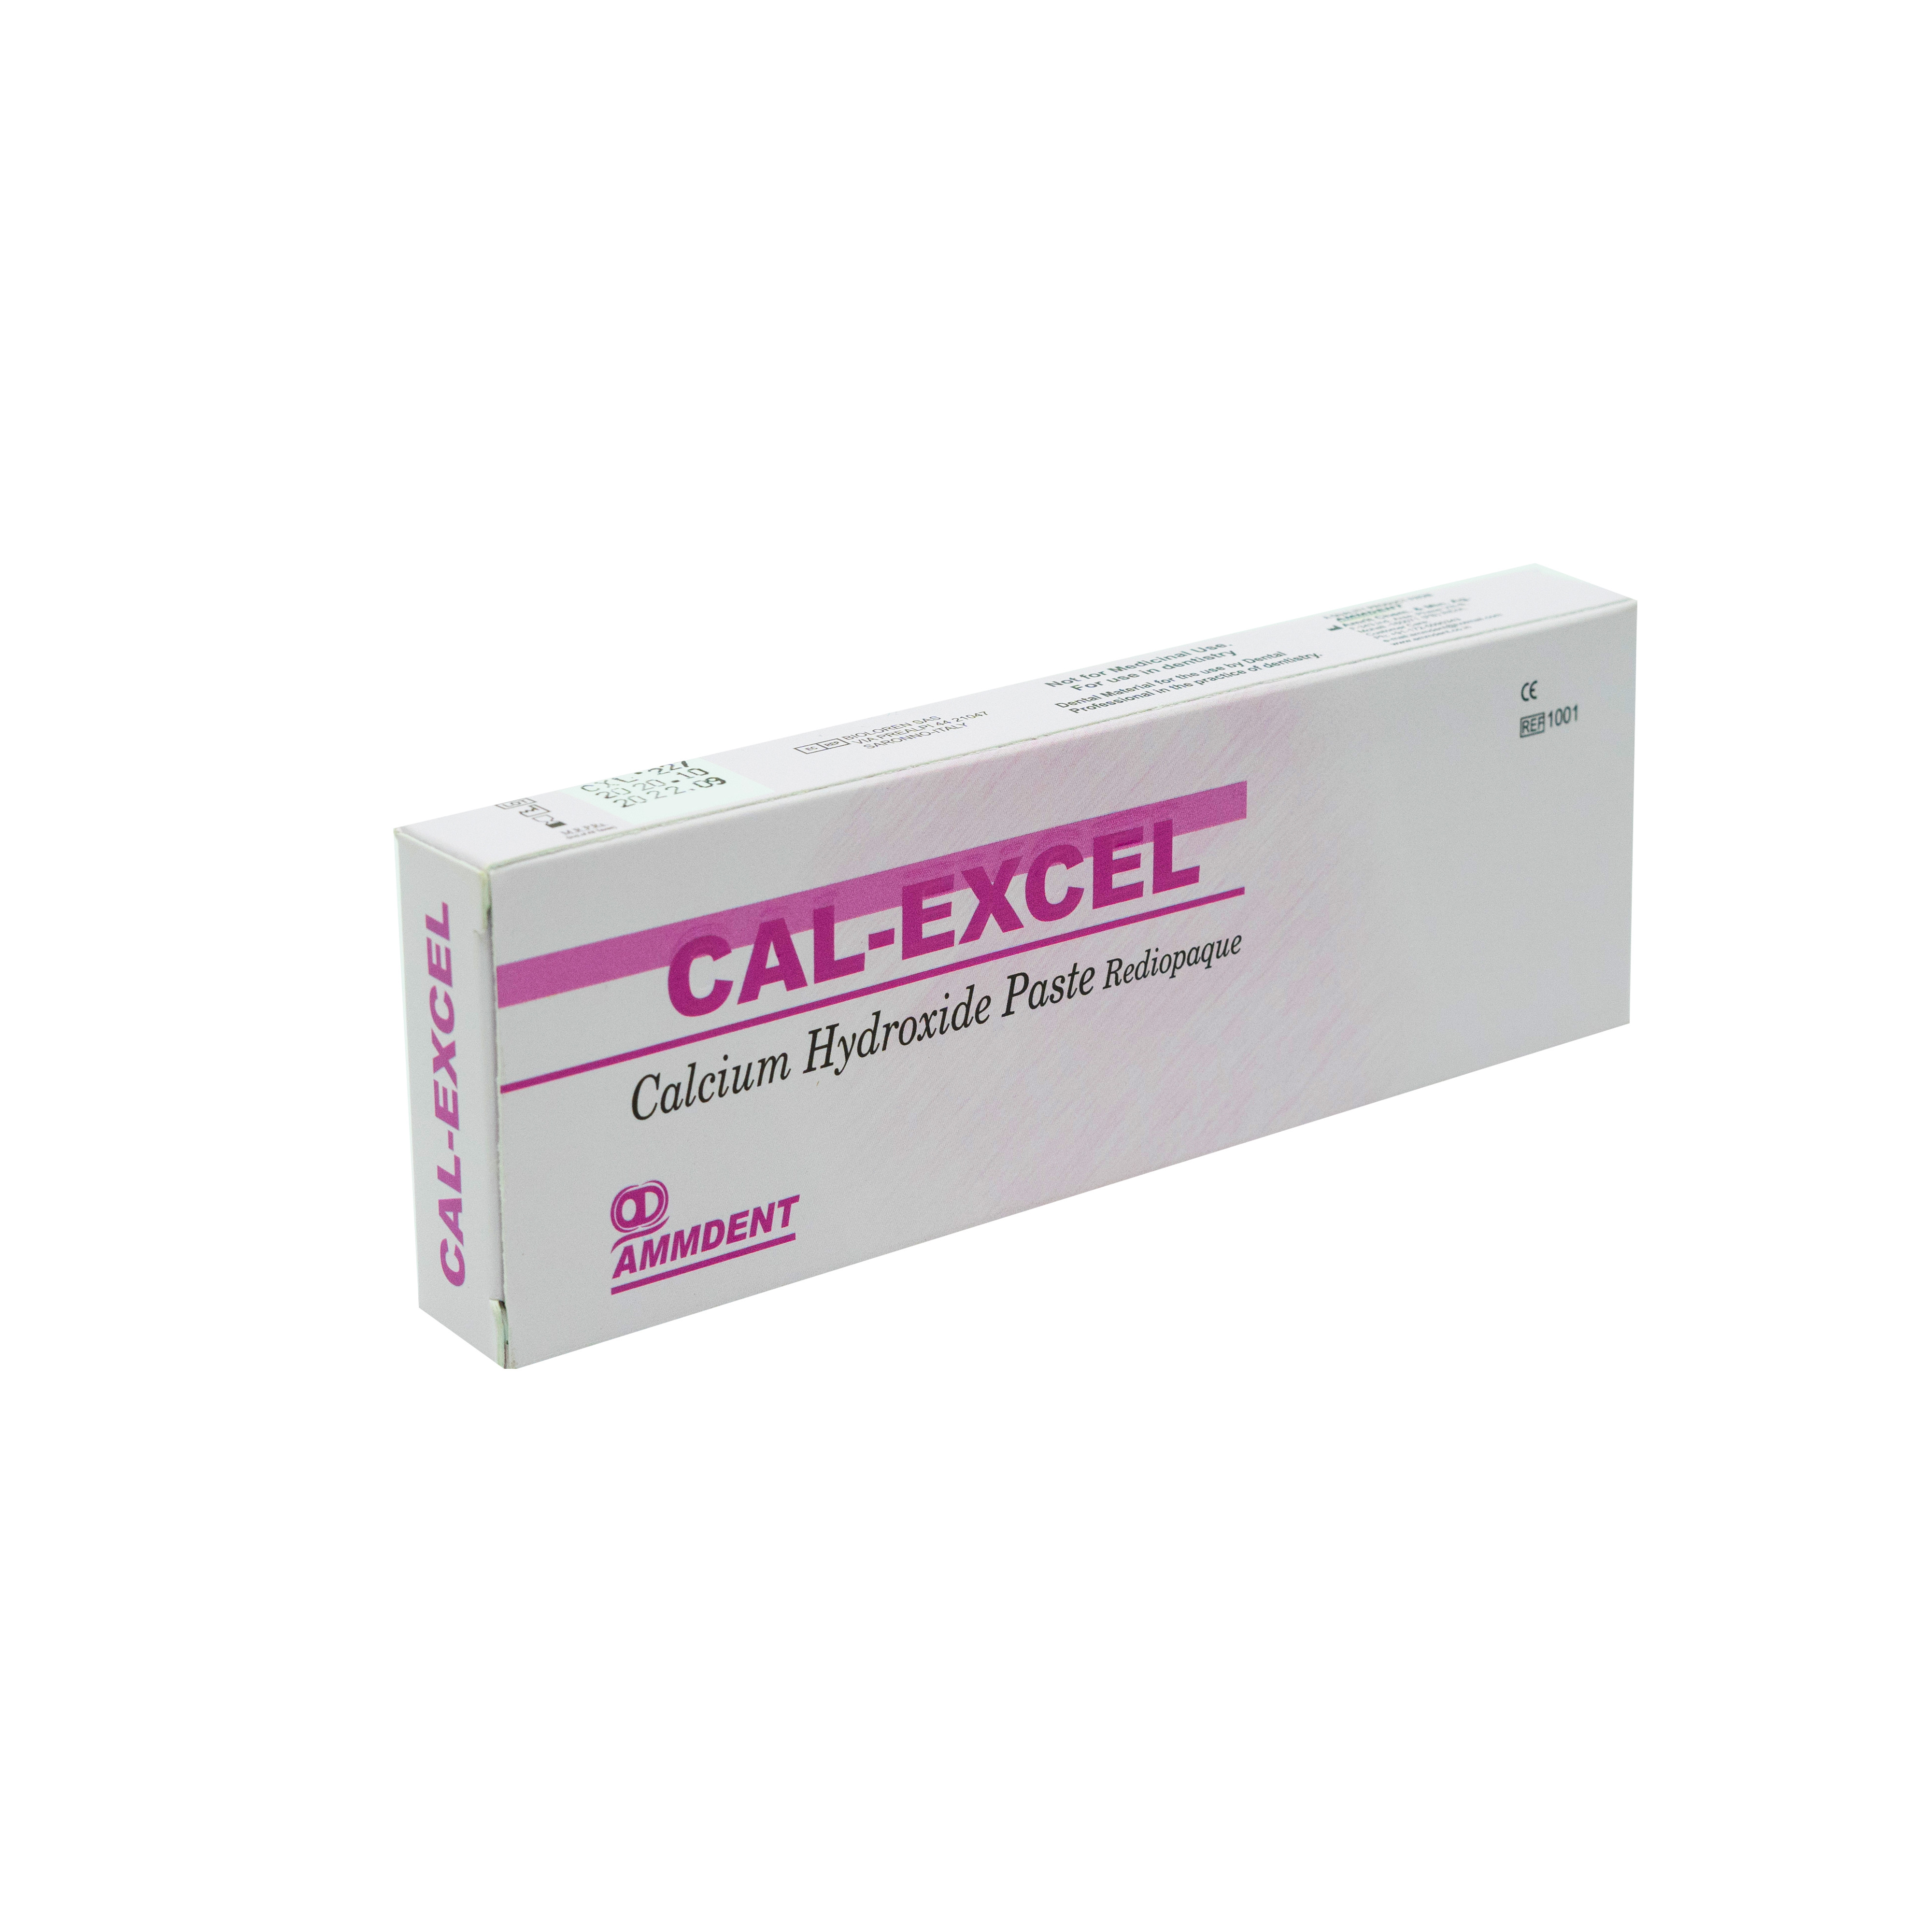 Ammdent Cal Excel Calcium Hydroxide 2gm Syringe With Tips